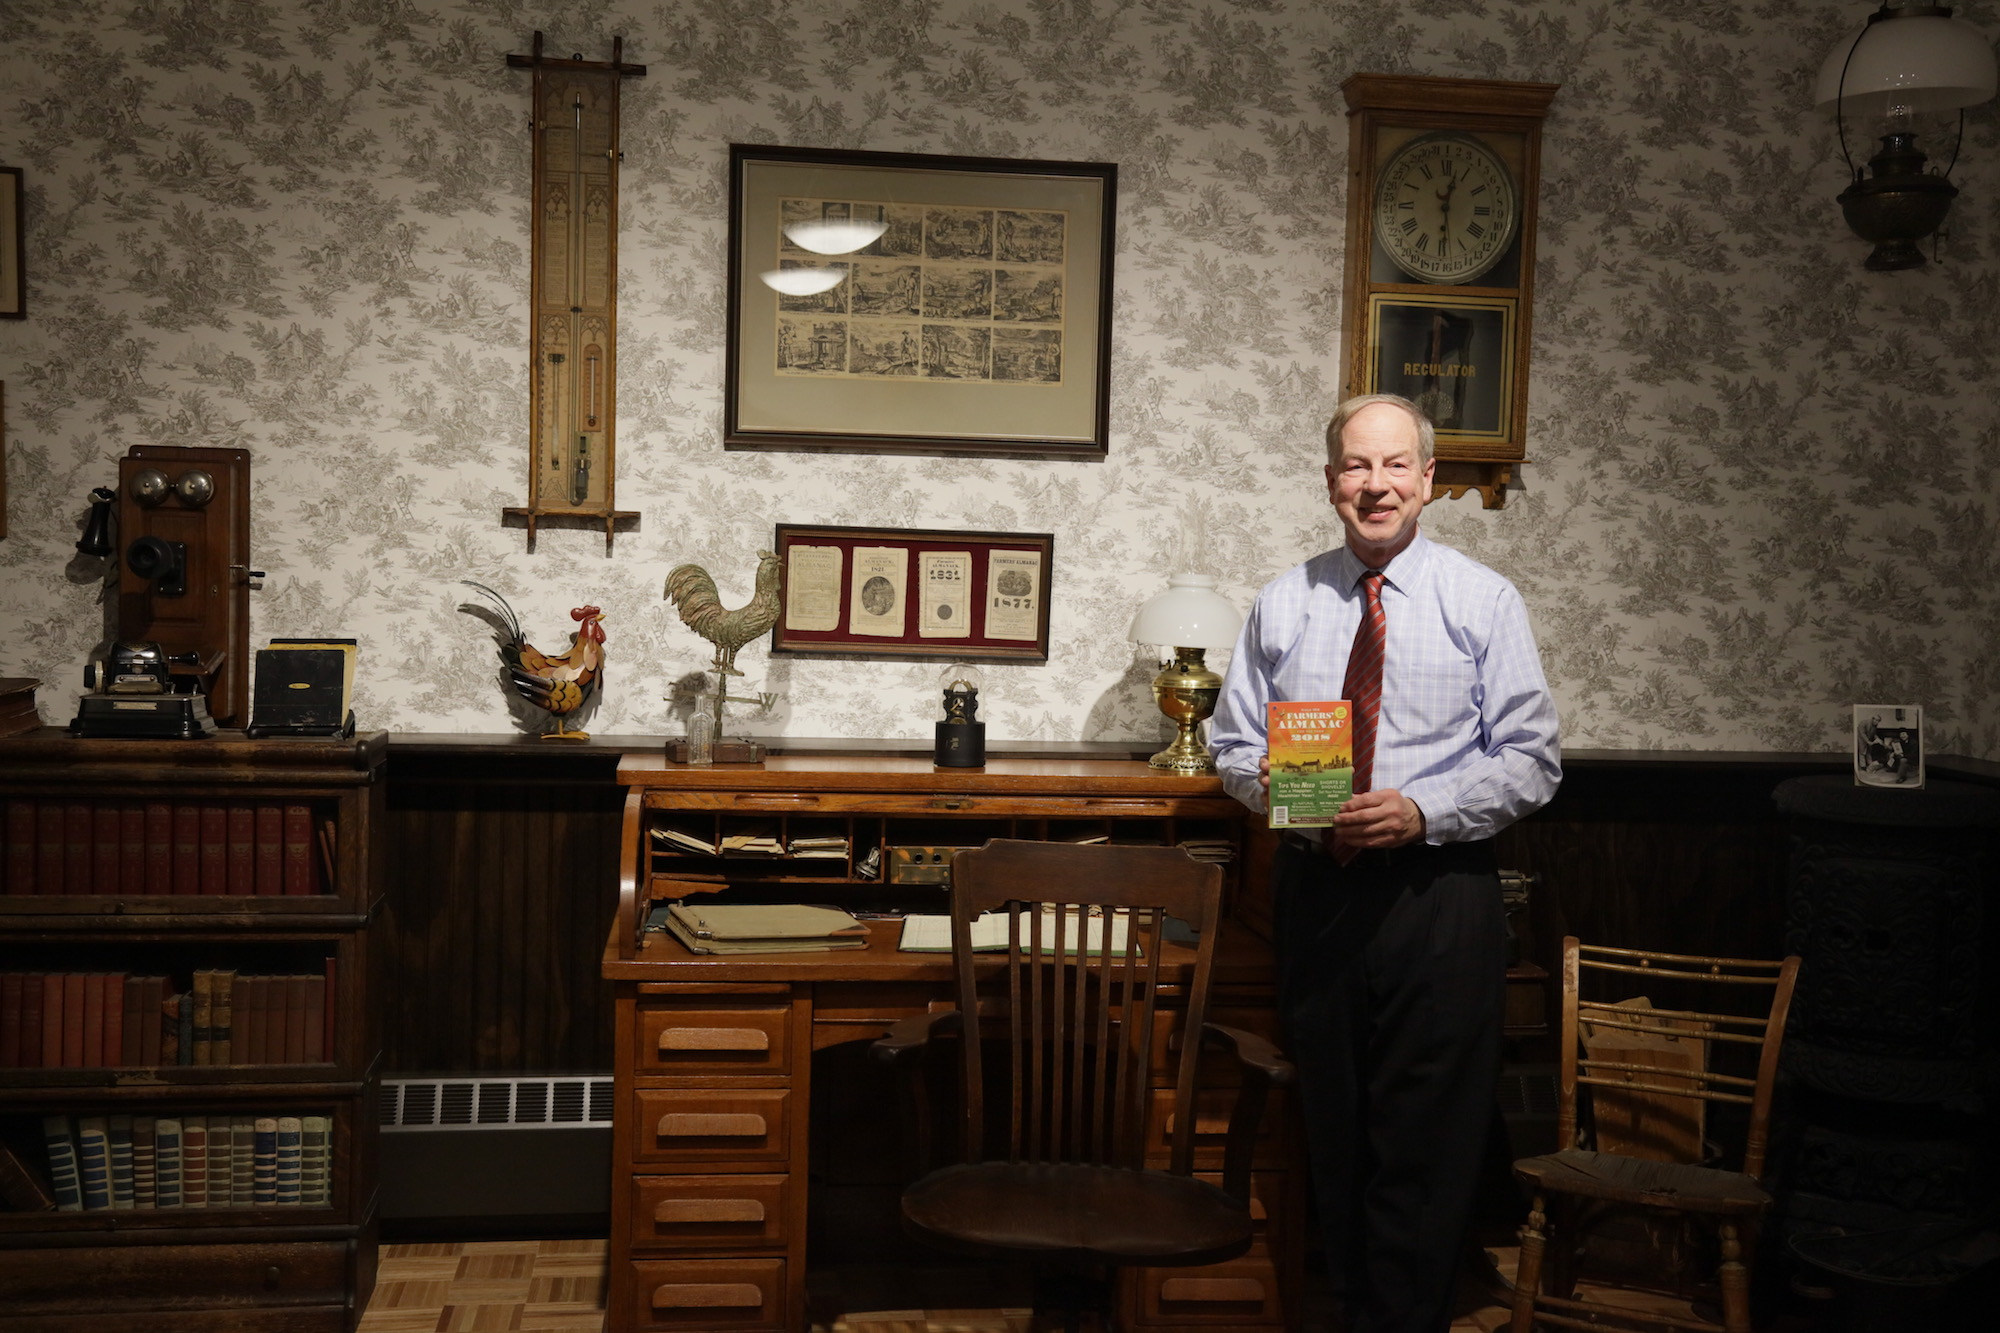 Peter Geiger in the Farmer's Almanac Museum at Geiger.